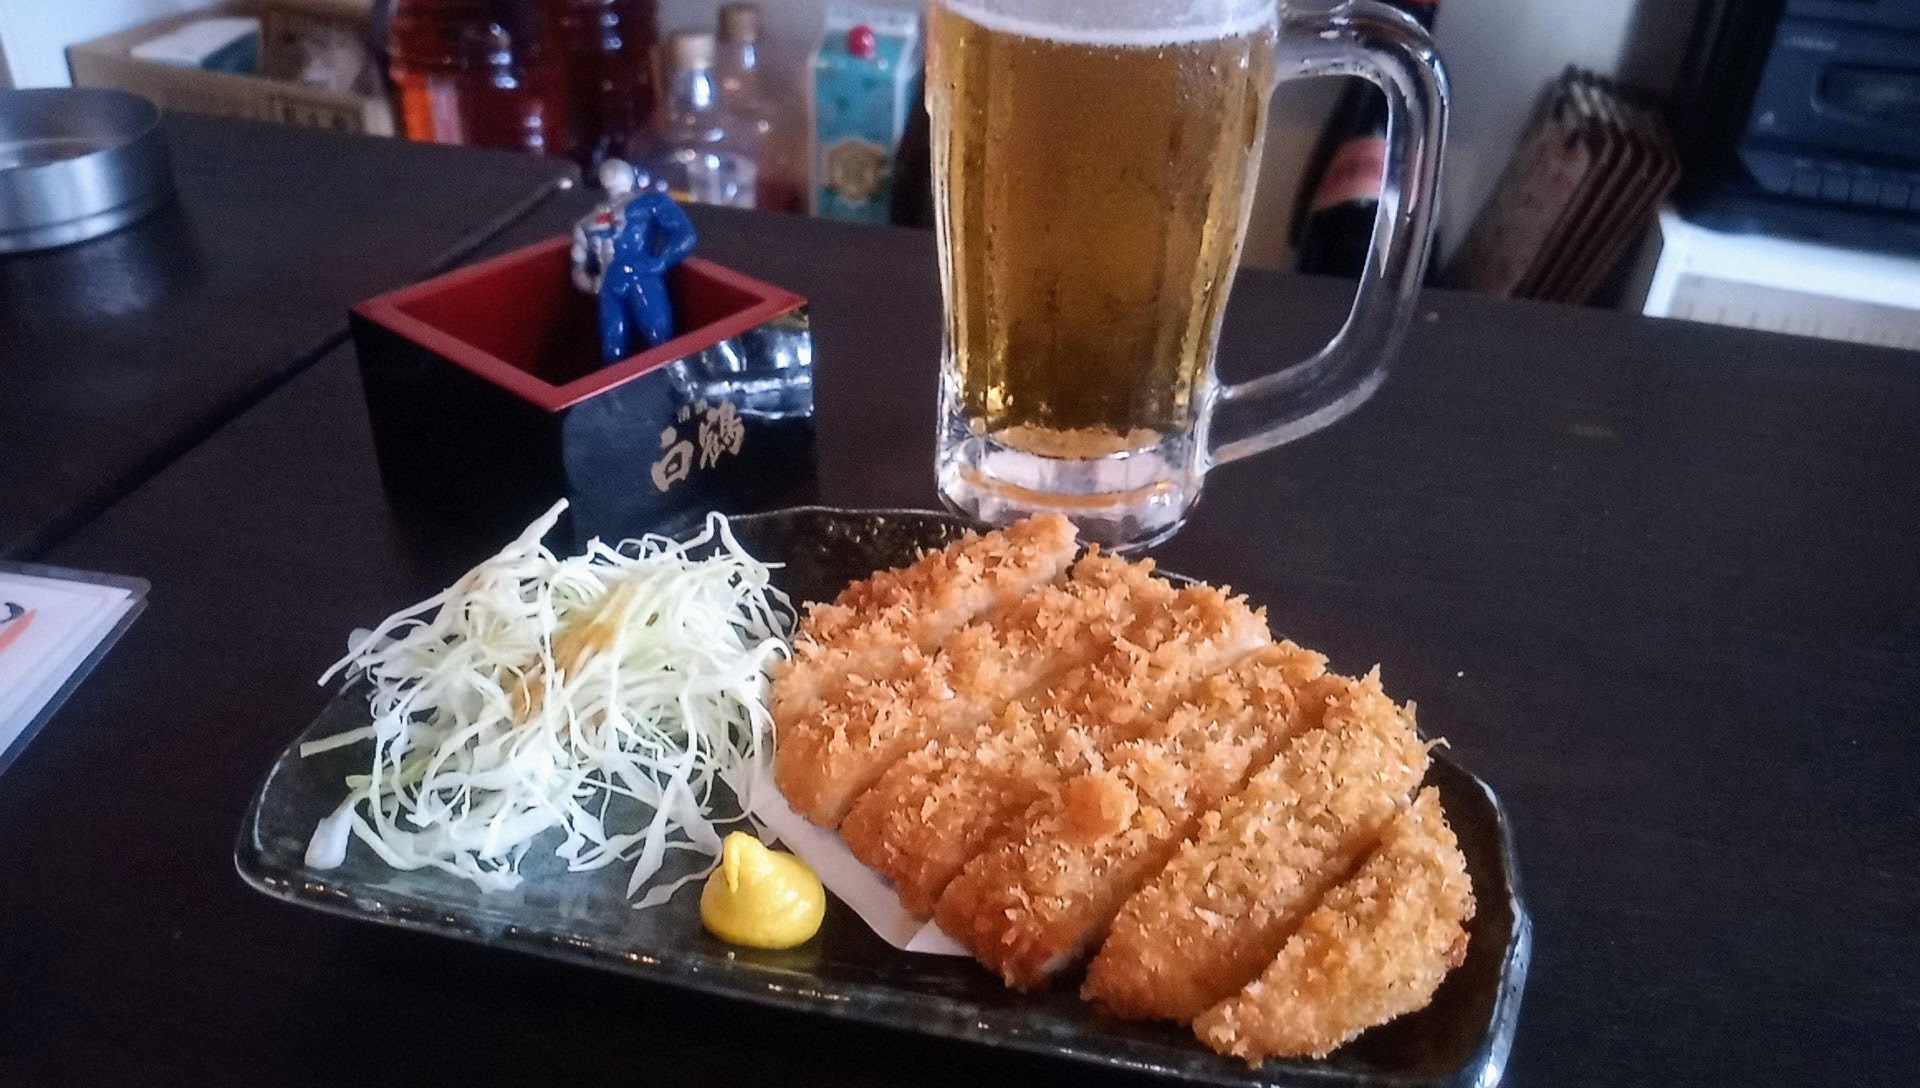 Chicken cutlet and beer